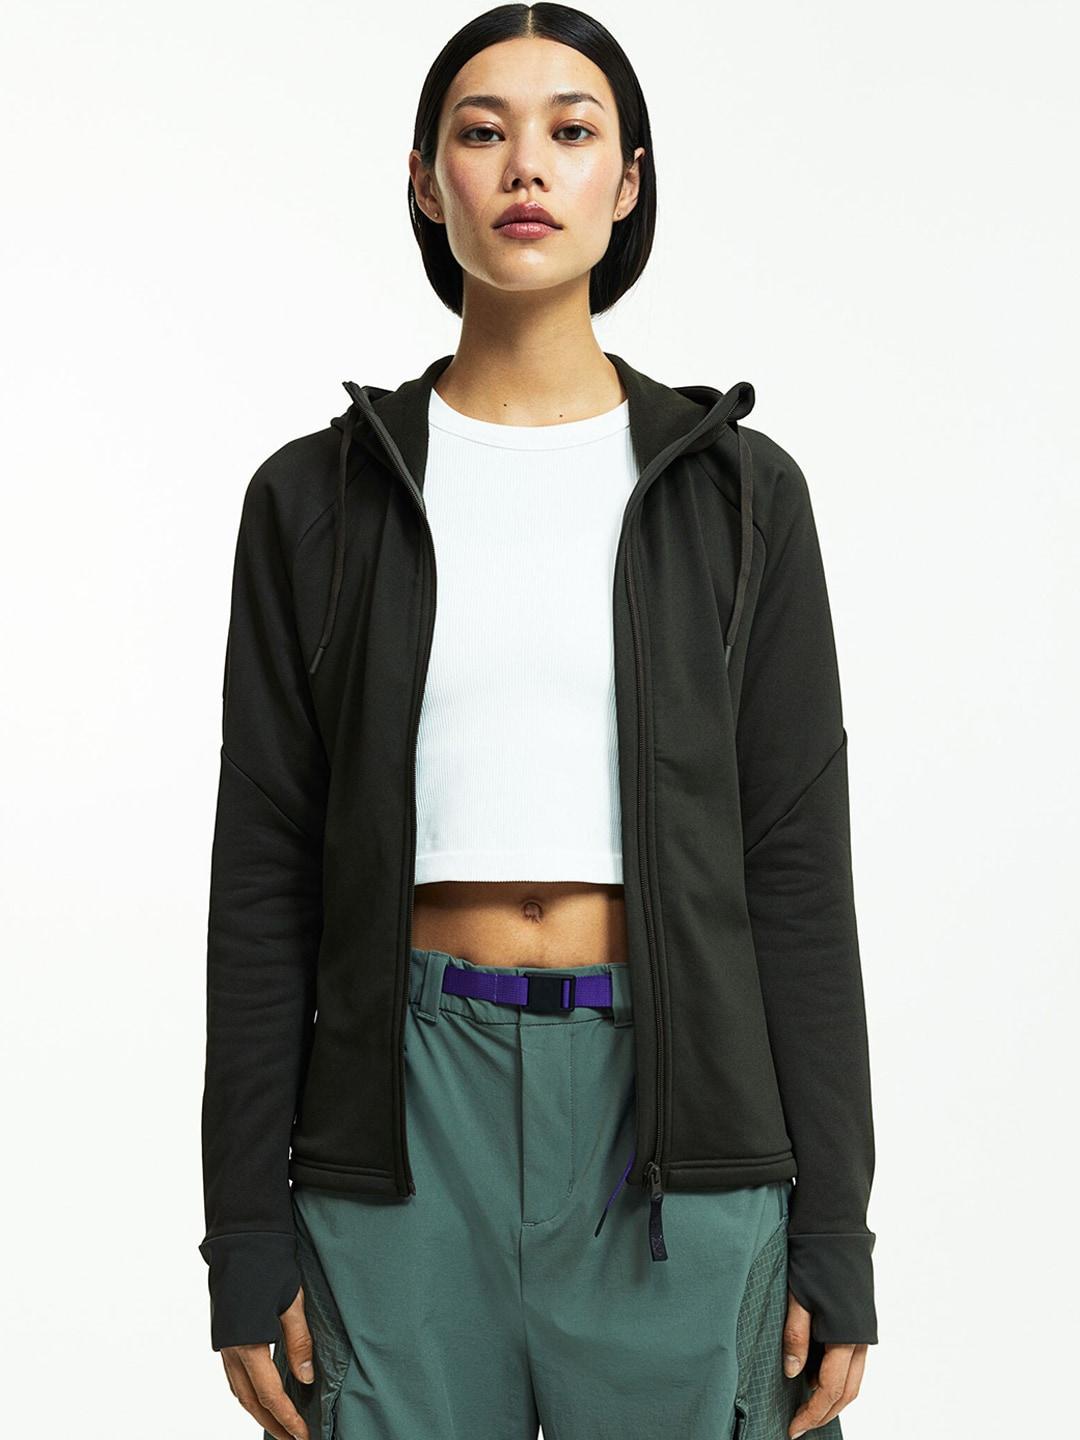 h&m mid layer jacket